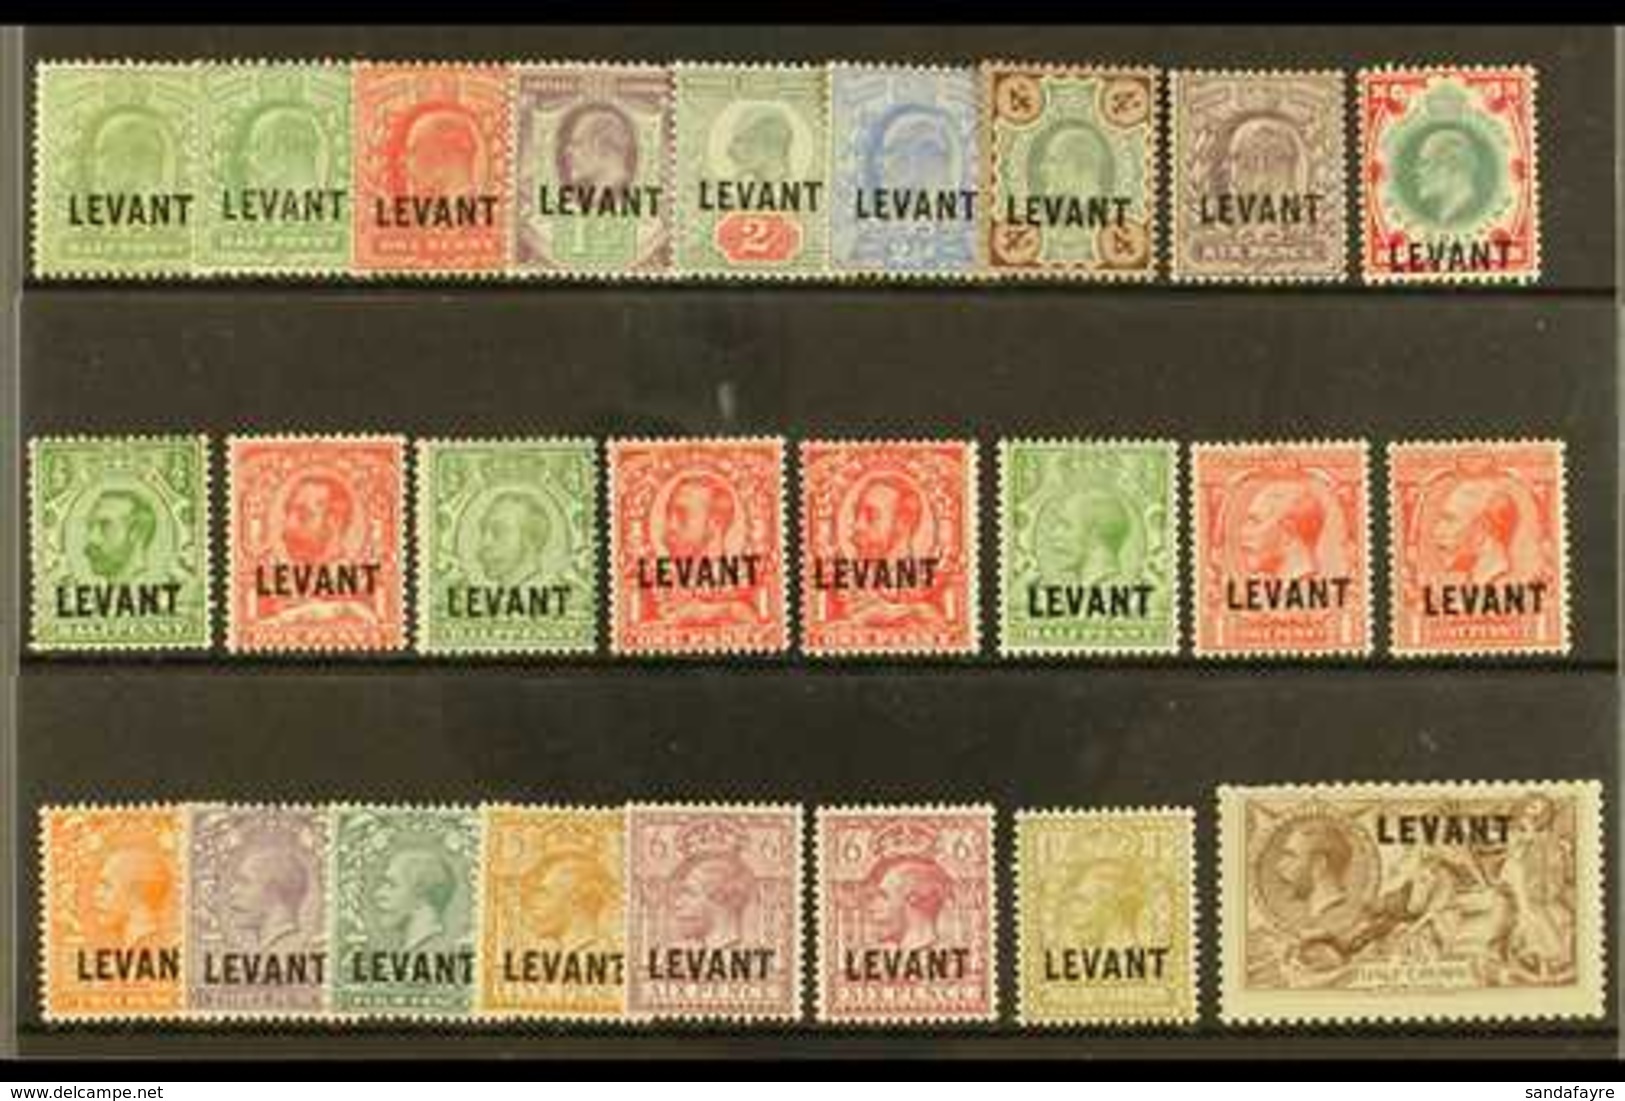 BRITISH CURRENCY  1905-21 MINT COLLECTION. An Attractive, All Different Mint "LEVANT" Opt'd Group That Includes 1905-12  - British Levant